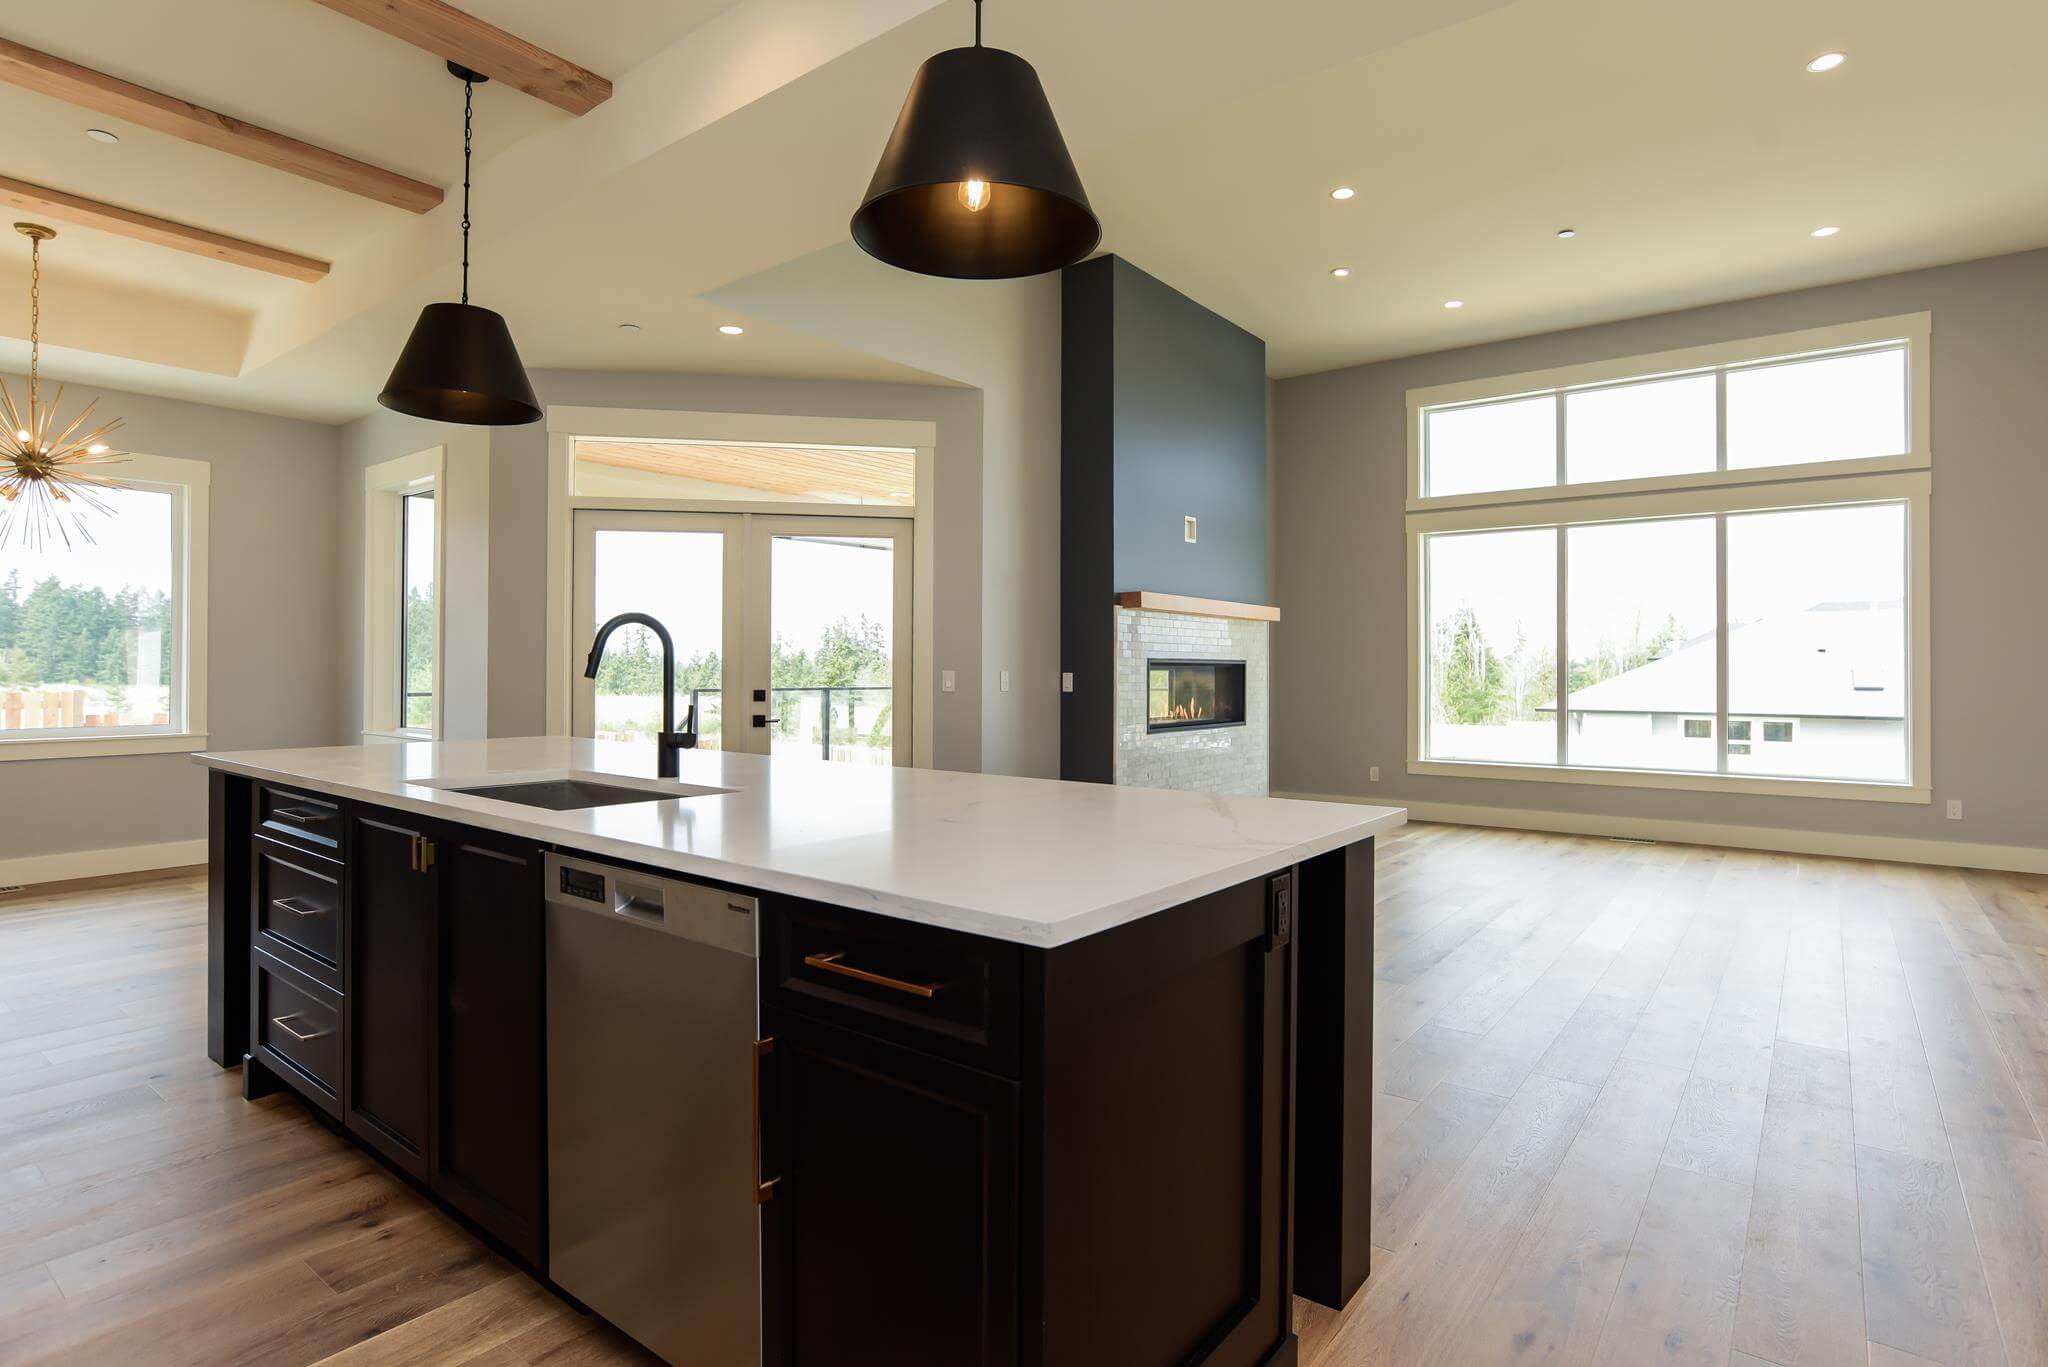 We Have Lots for Your New Design/Build Home in Courtenay, BC